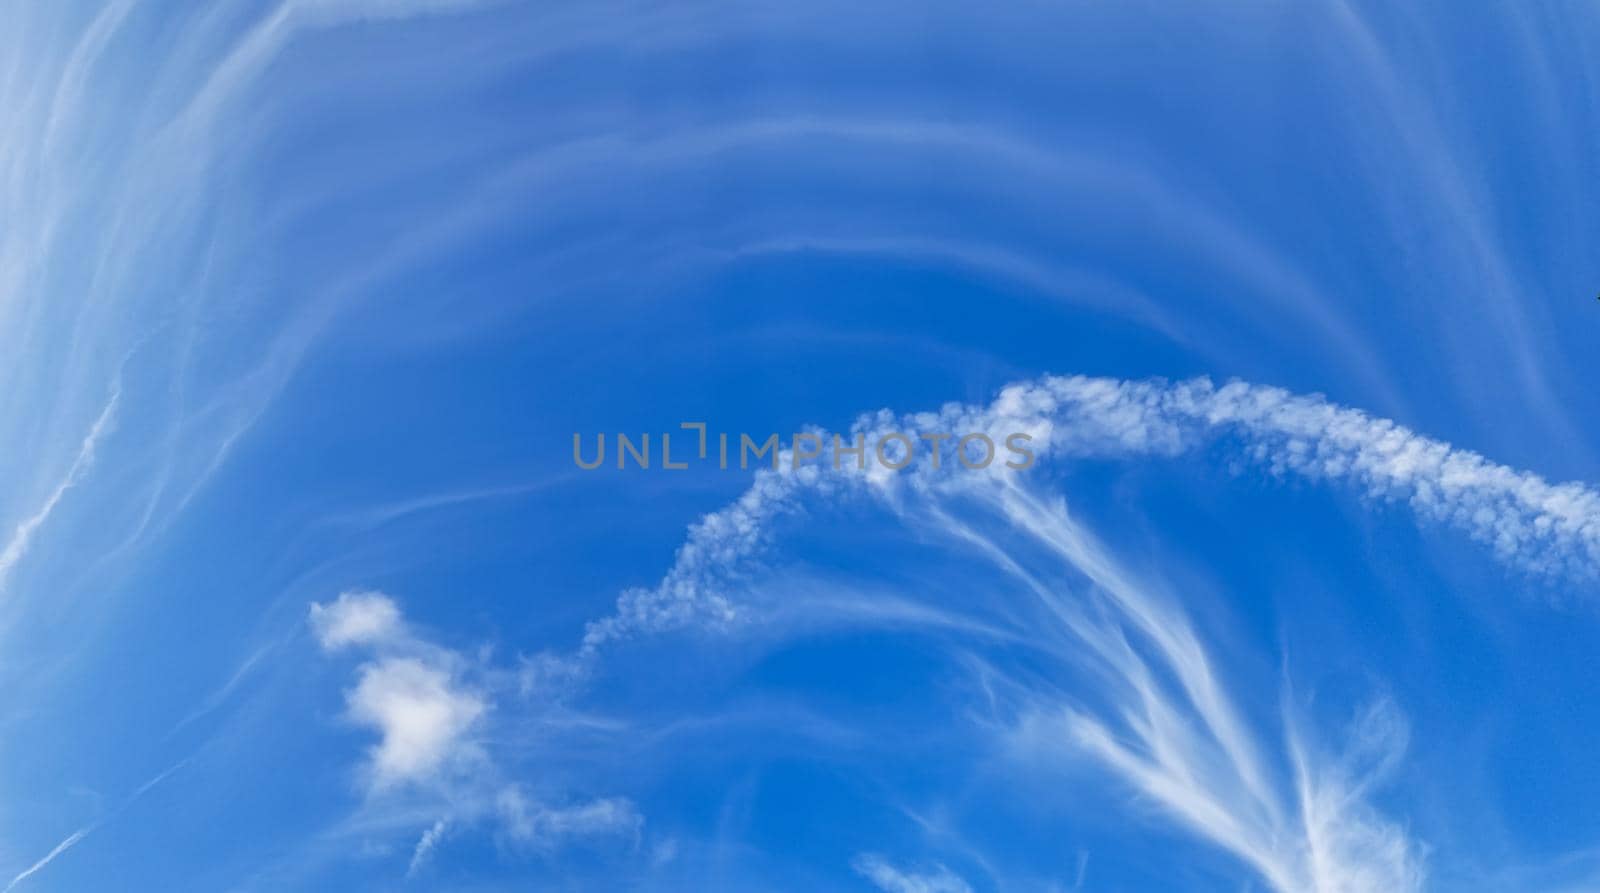 White clouds on the blue sky background. Panoramic photo by zakob337